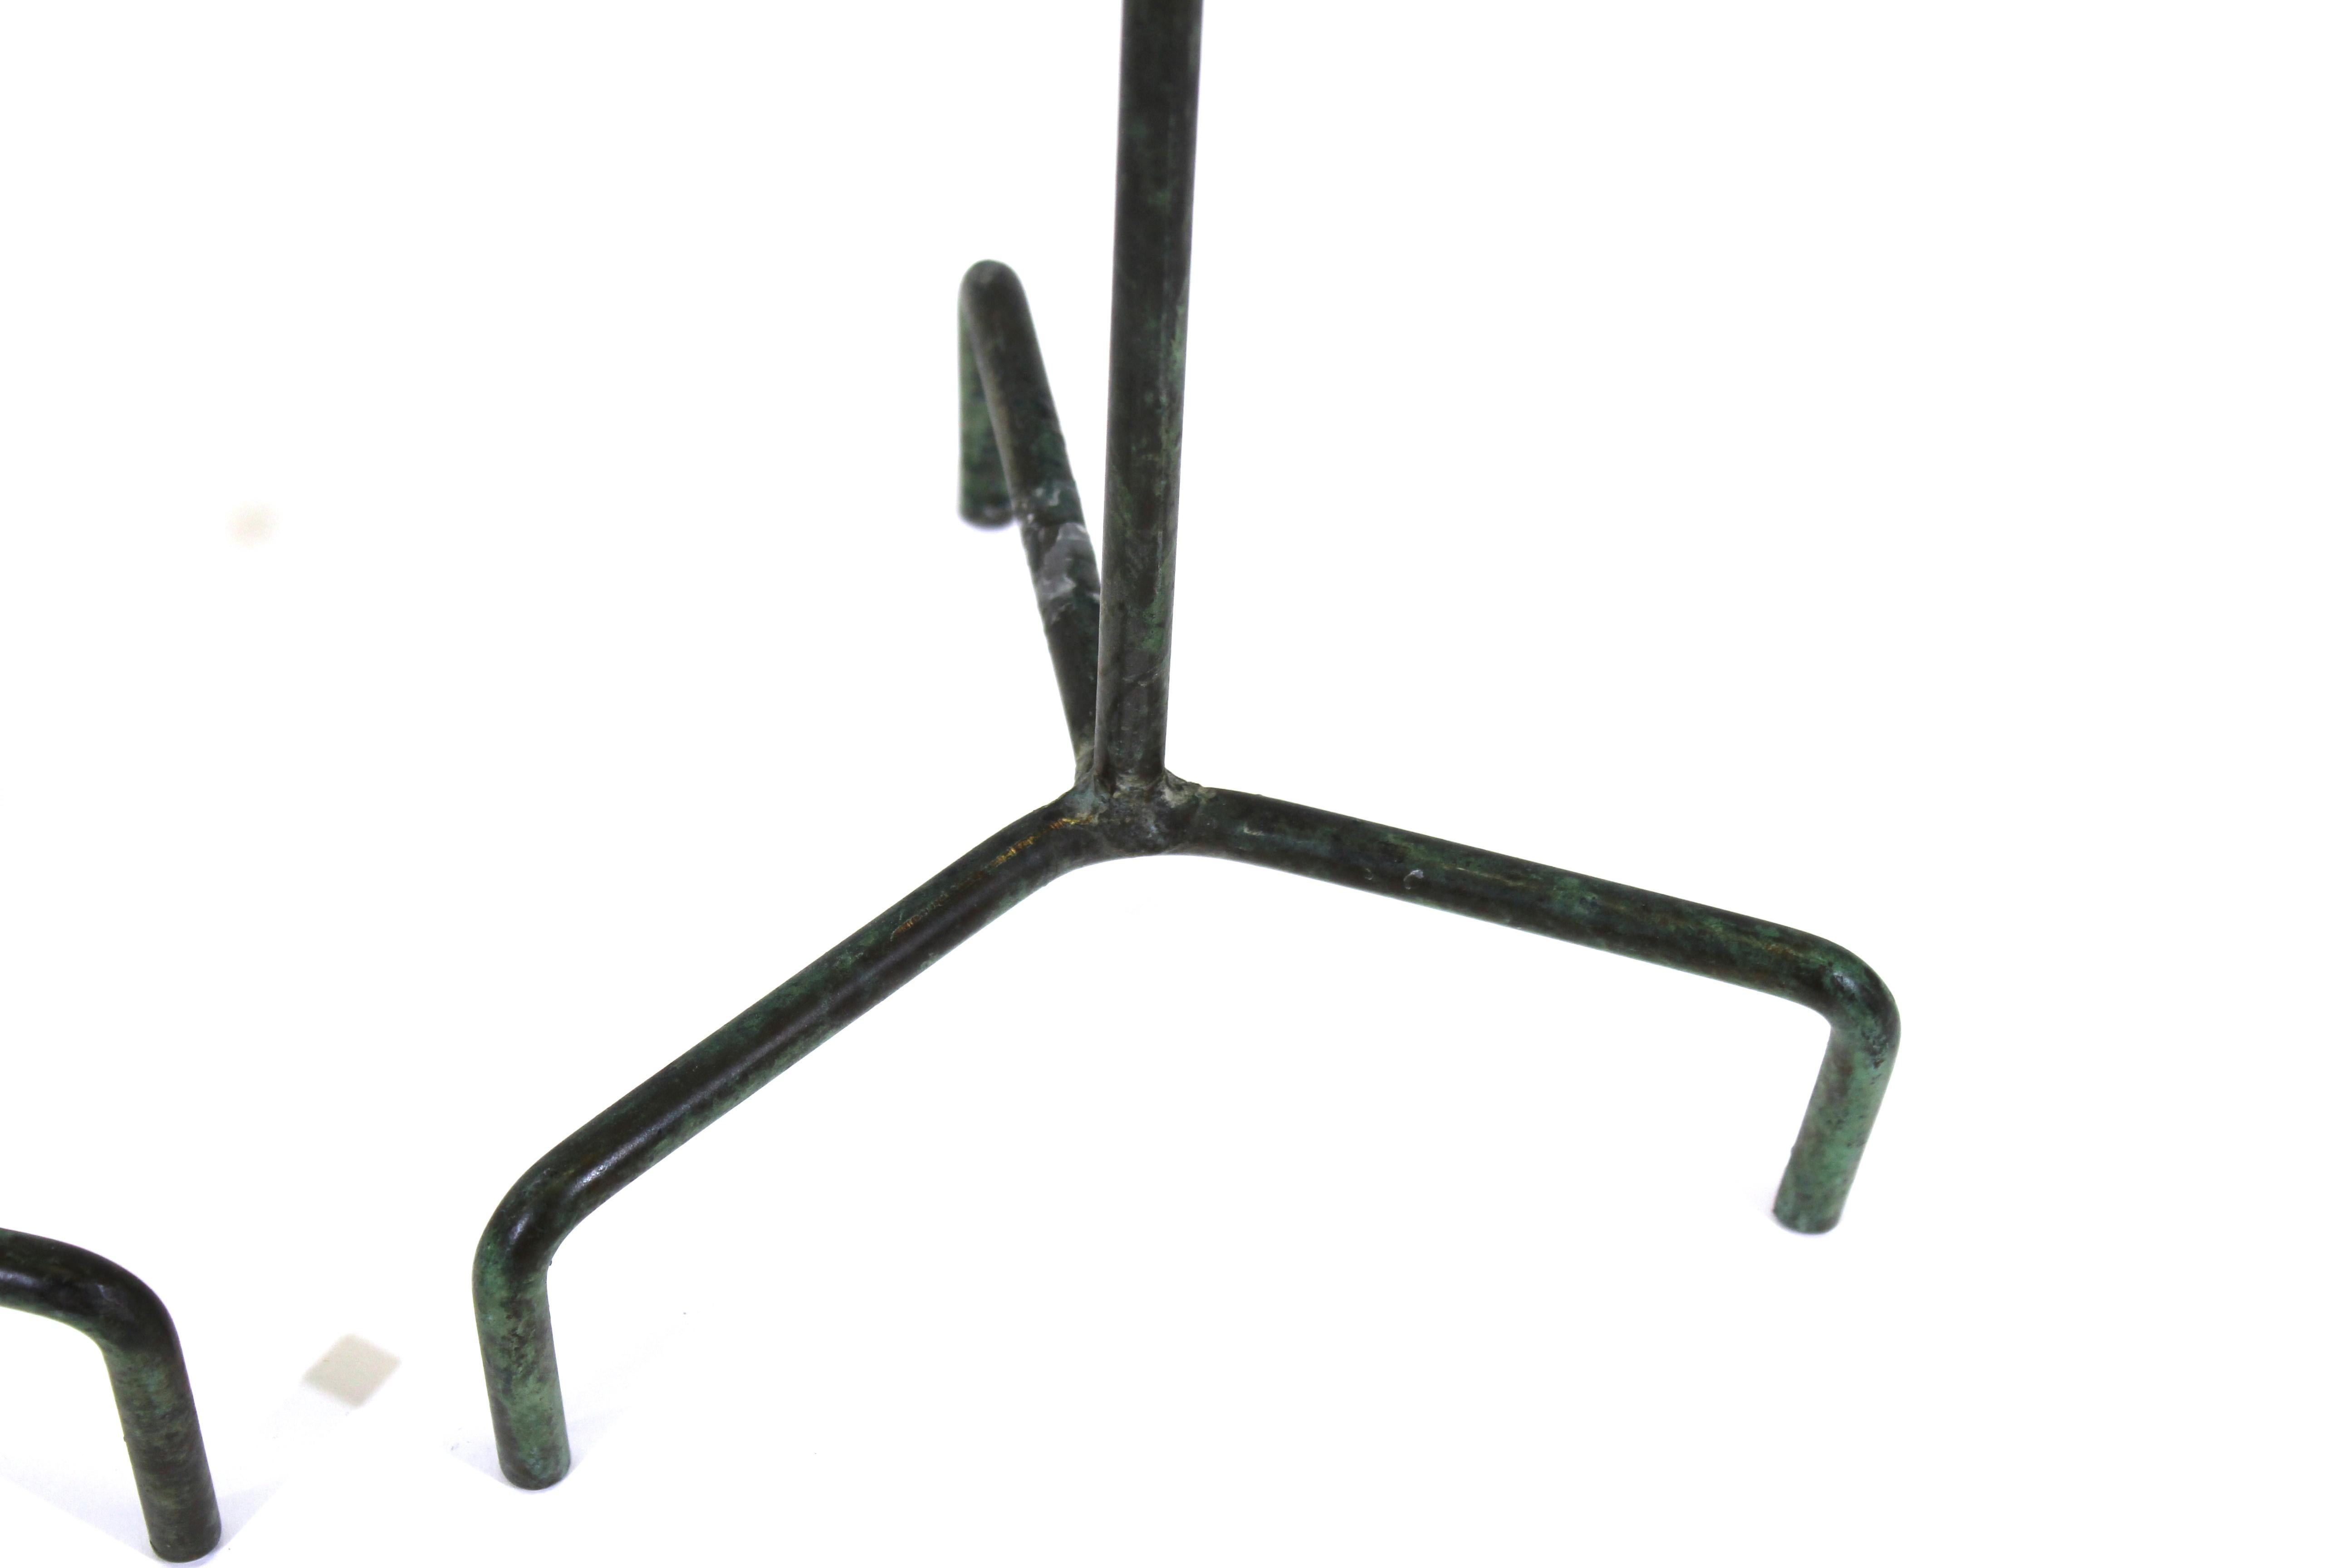 Pair of modernist style metal tripod candlesticks with verdigris finish, with makers marks on the bottom of the candle plates.